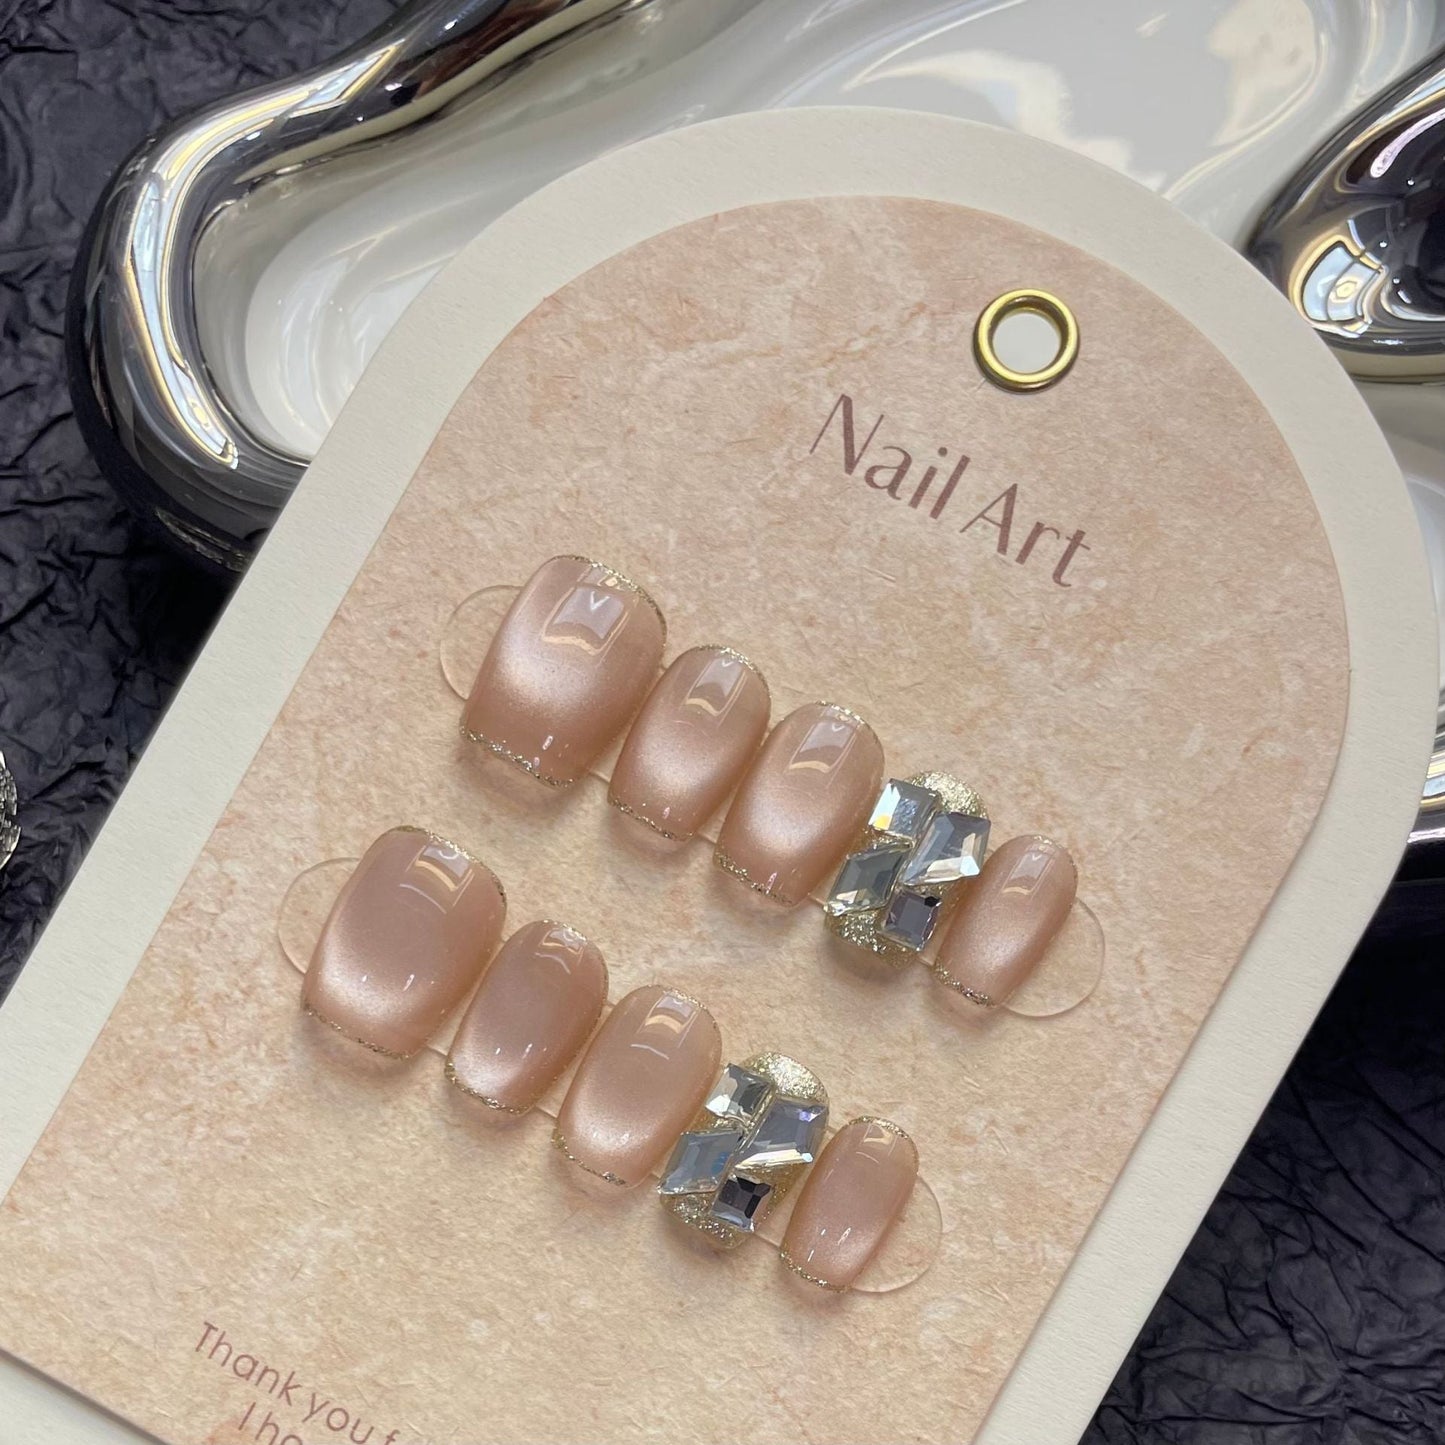 1213 Cateye Effect style press on nails 100% handmade false nails nude color